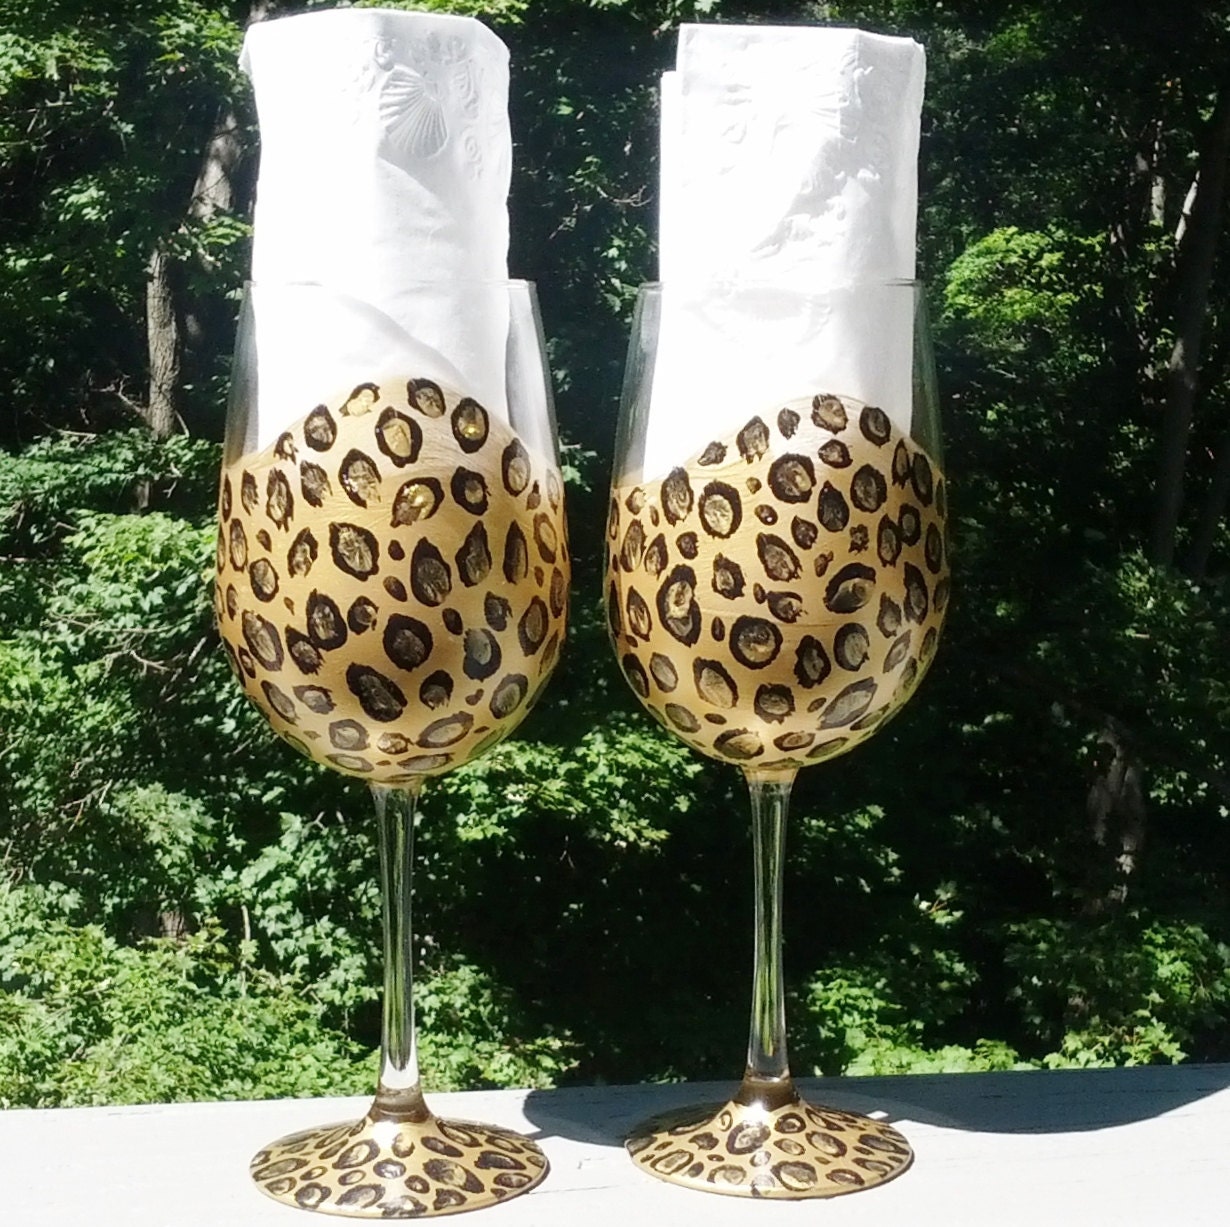 Hand Painted Wine Glass - Leopard Bling Set - Original Designs by